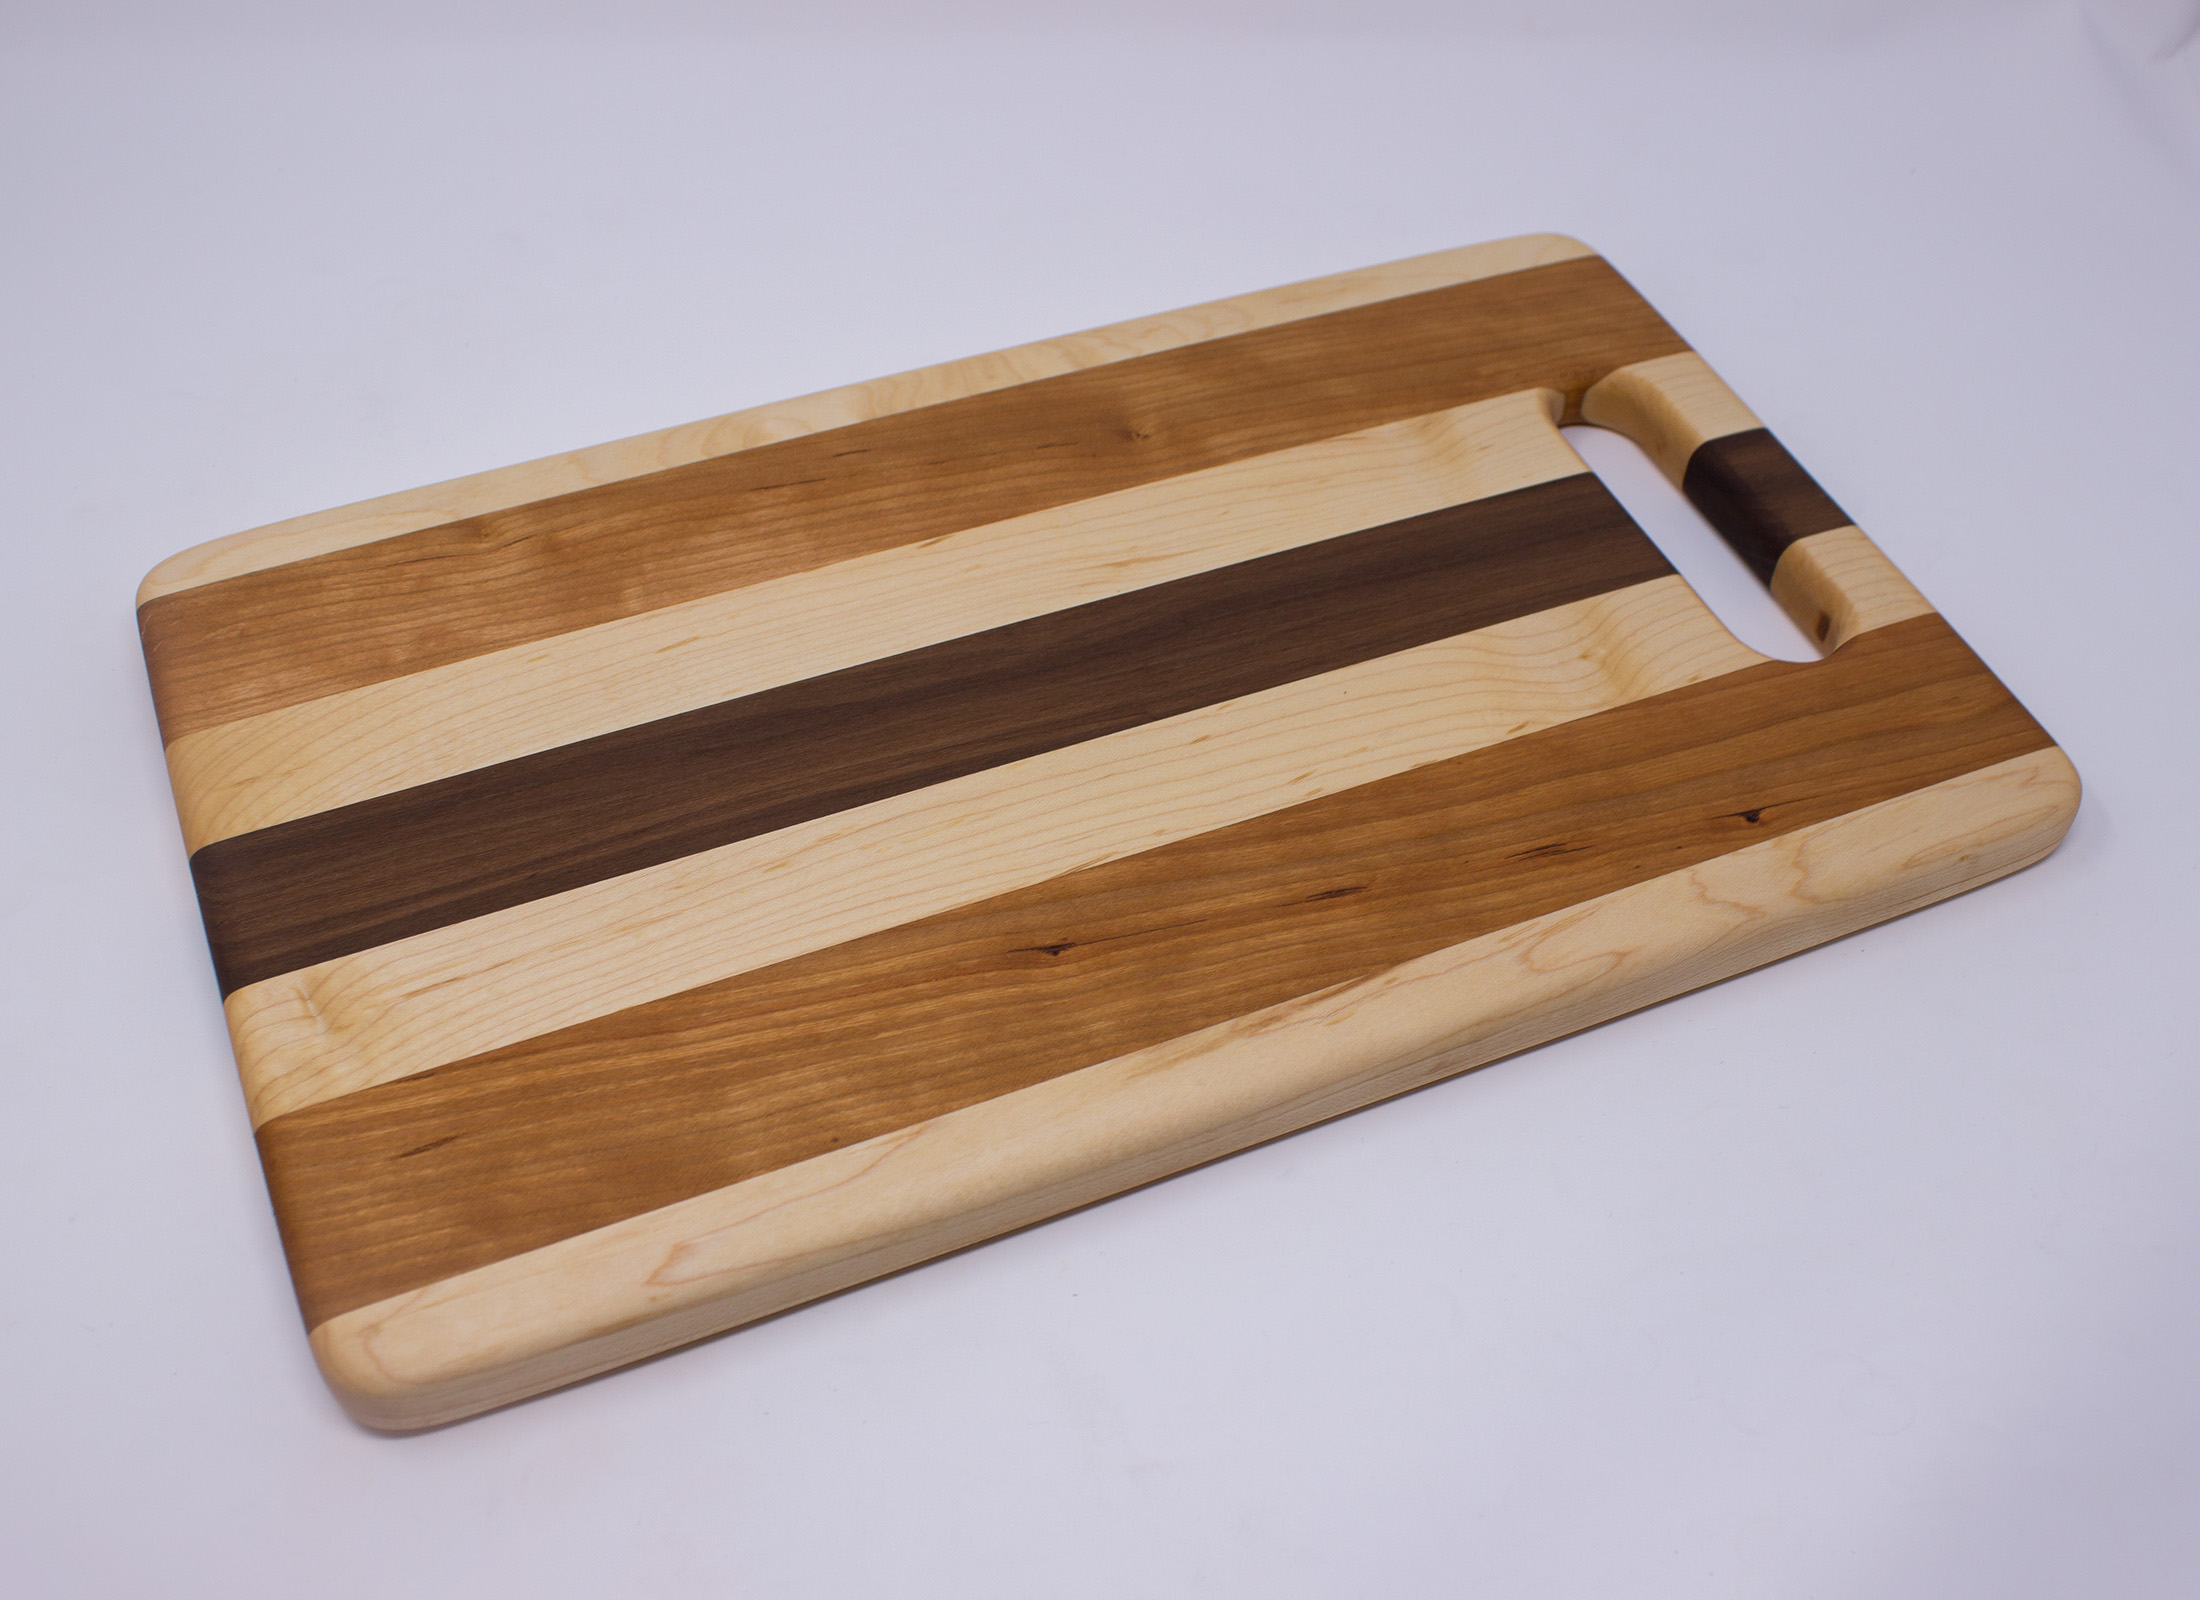 https://www.rockfordwoodcrafts.com/wp-content/uploads/Maple-Cherry-and-Walnut-Cutting-Board-with-Handle-Top-Angled-Right.jpg